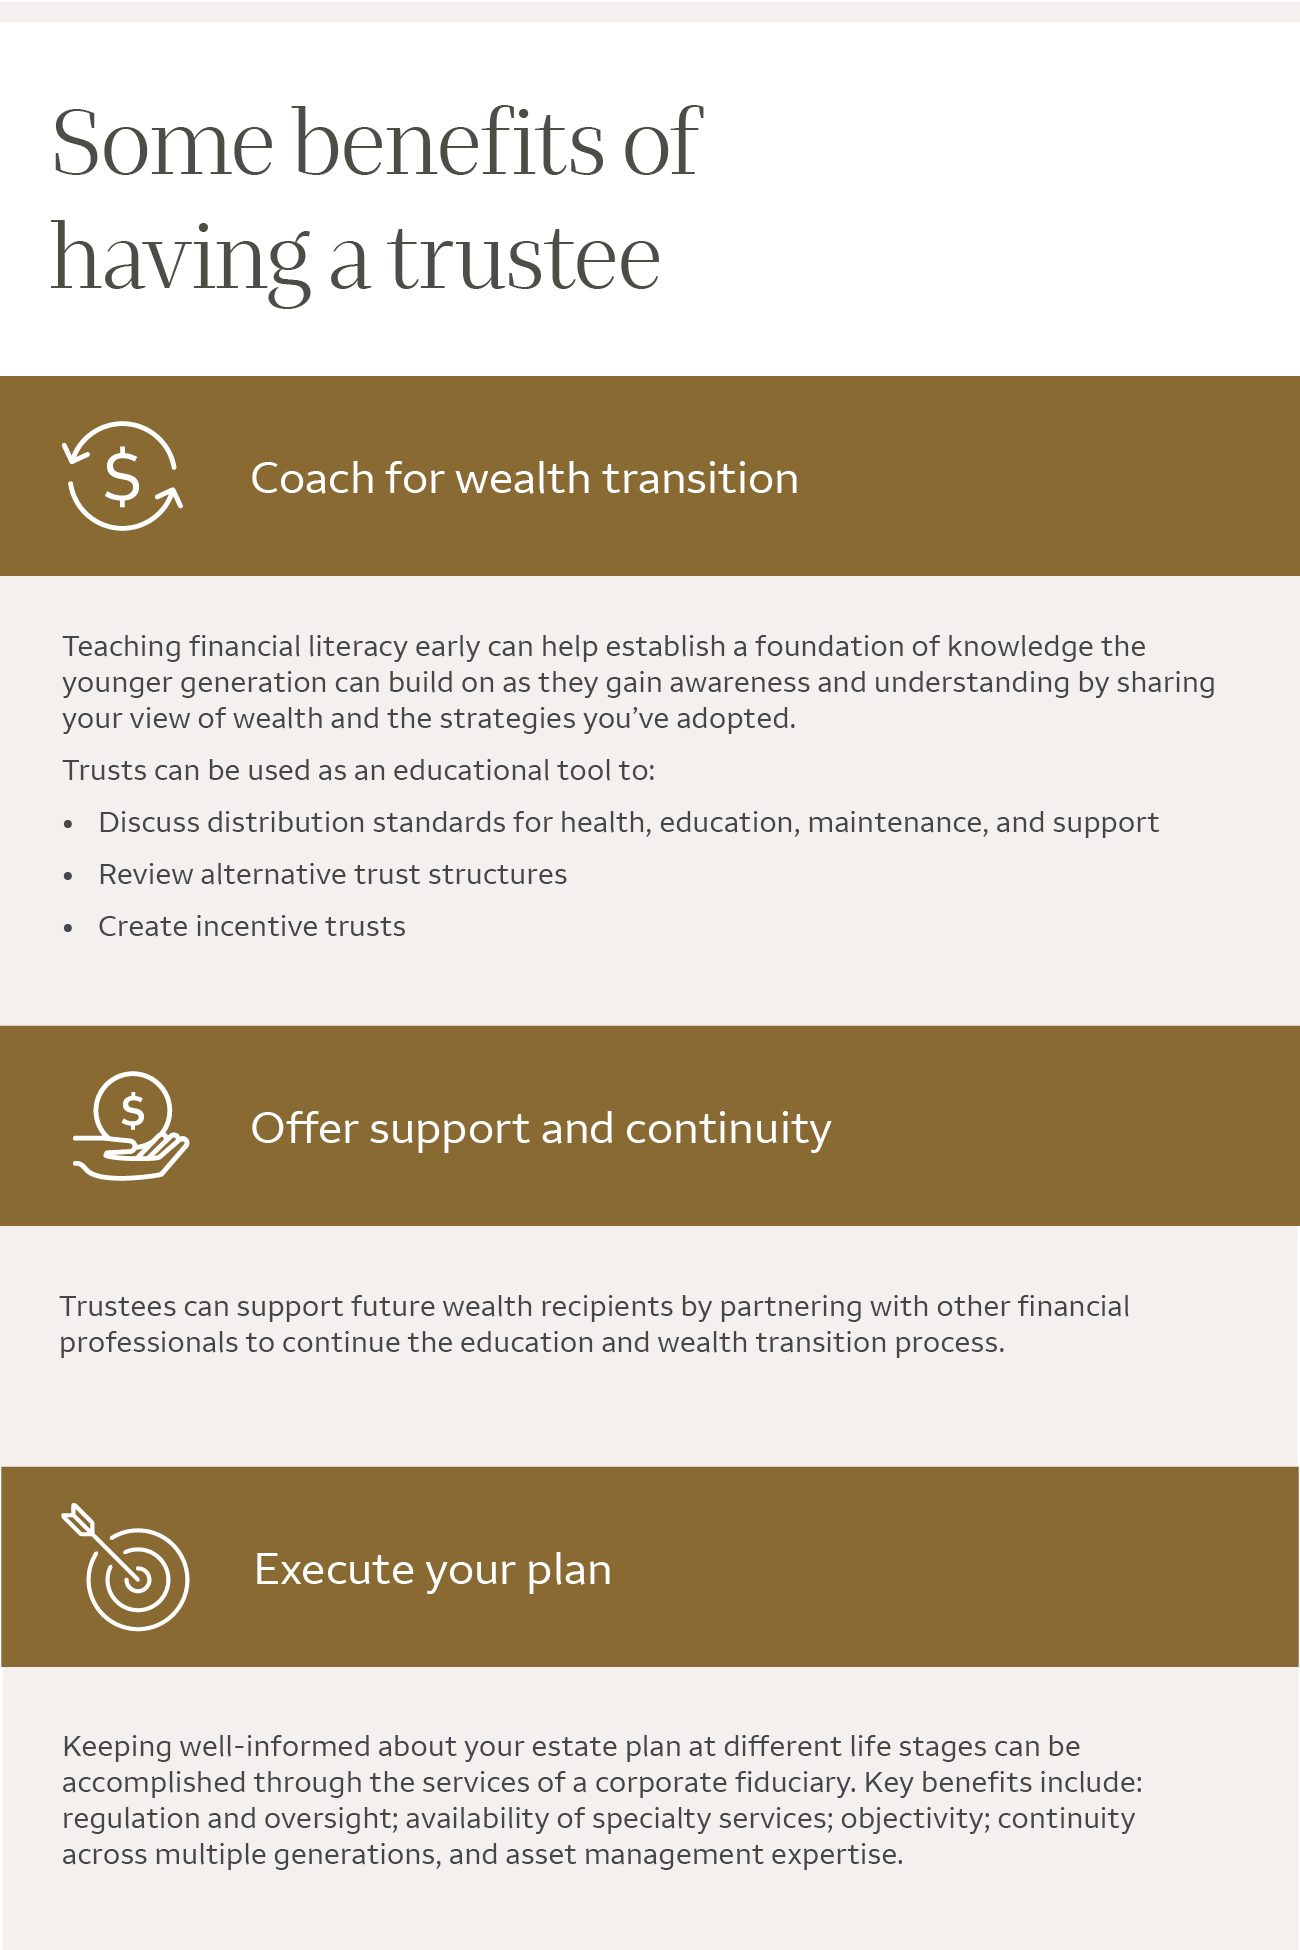 Infographic detailing the benefits of having a trustee. For details, click "view text alternative."